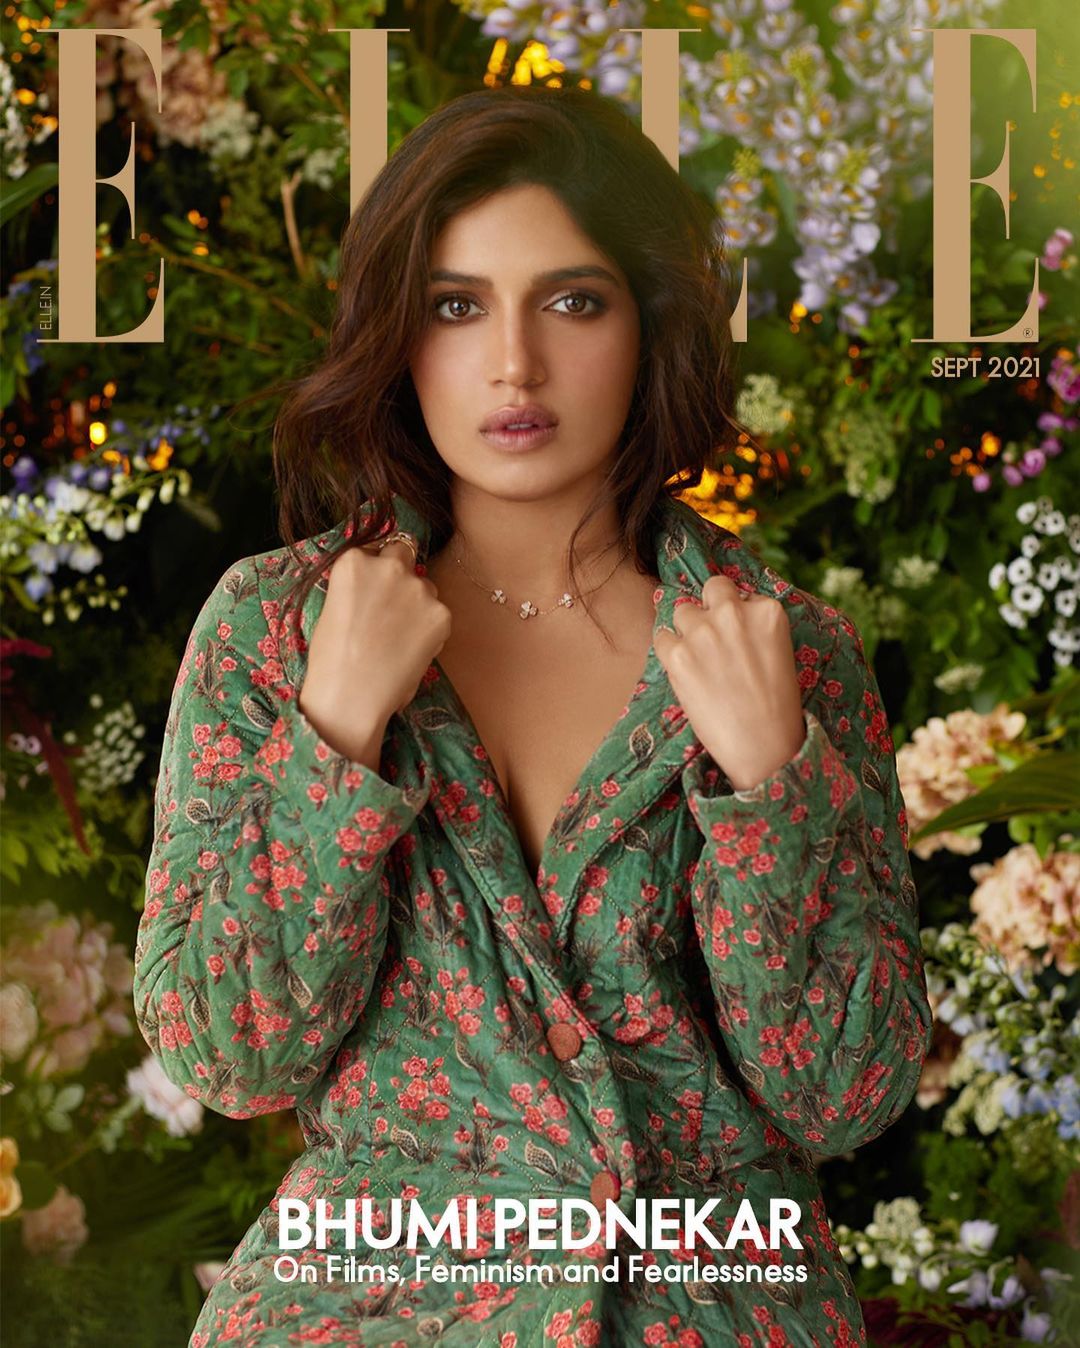 Bhumi Pednekar looks sexy in the green outfit. 